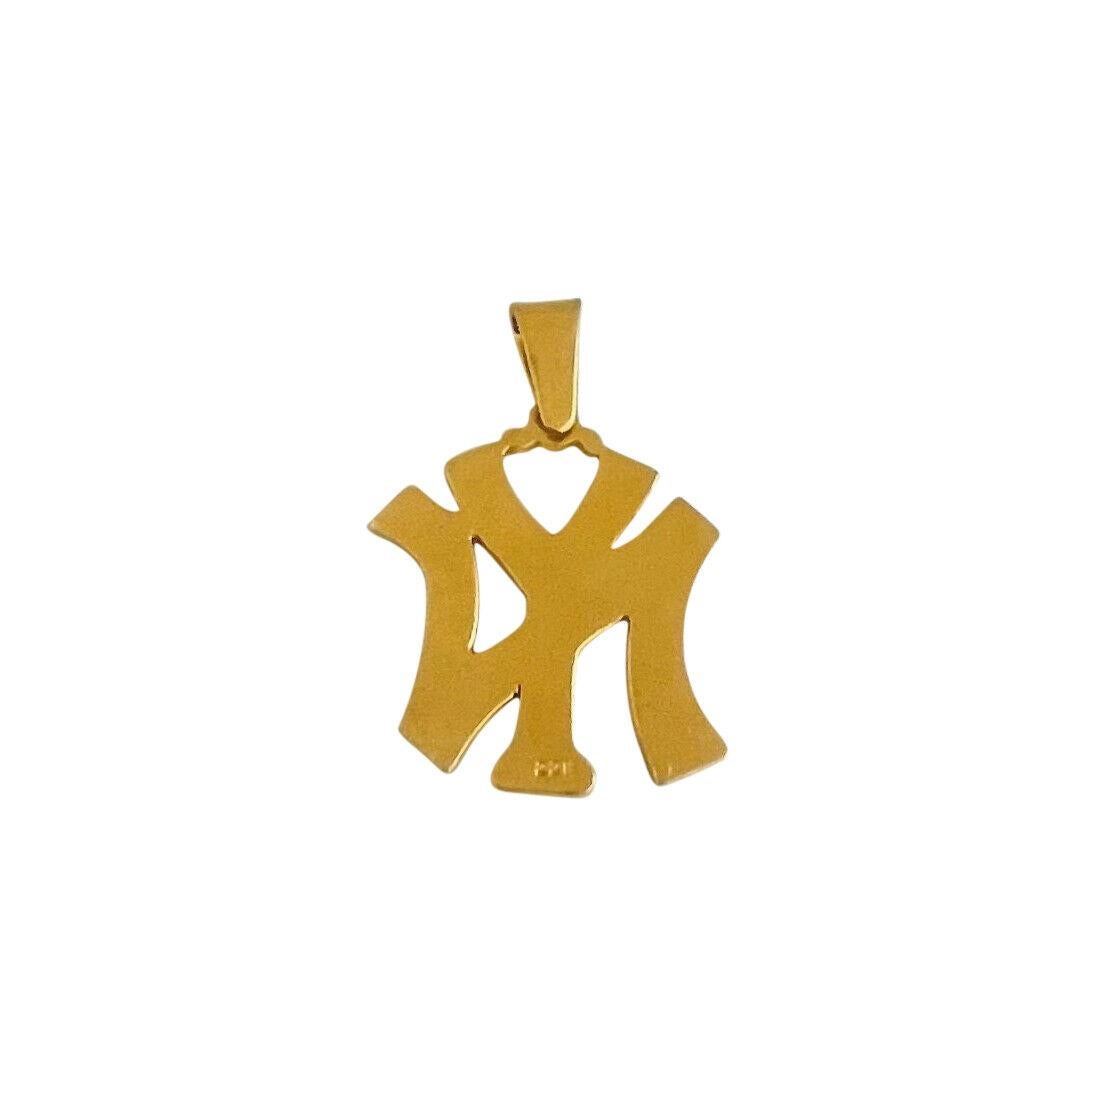 22k Yellow Gold 11.7g Solid Diamond Cut NY New York Yankees Pendant

Condition:  Excellent Condition, Professionally Cleaned and Polished
Metal:  22k Gold (Marked, and Professionally Tested)
Weight:  11.7g
Length:  1.7 Inches (including bail)
Width: